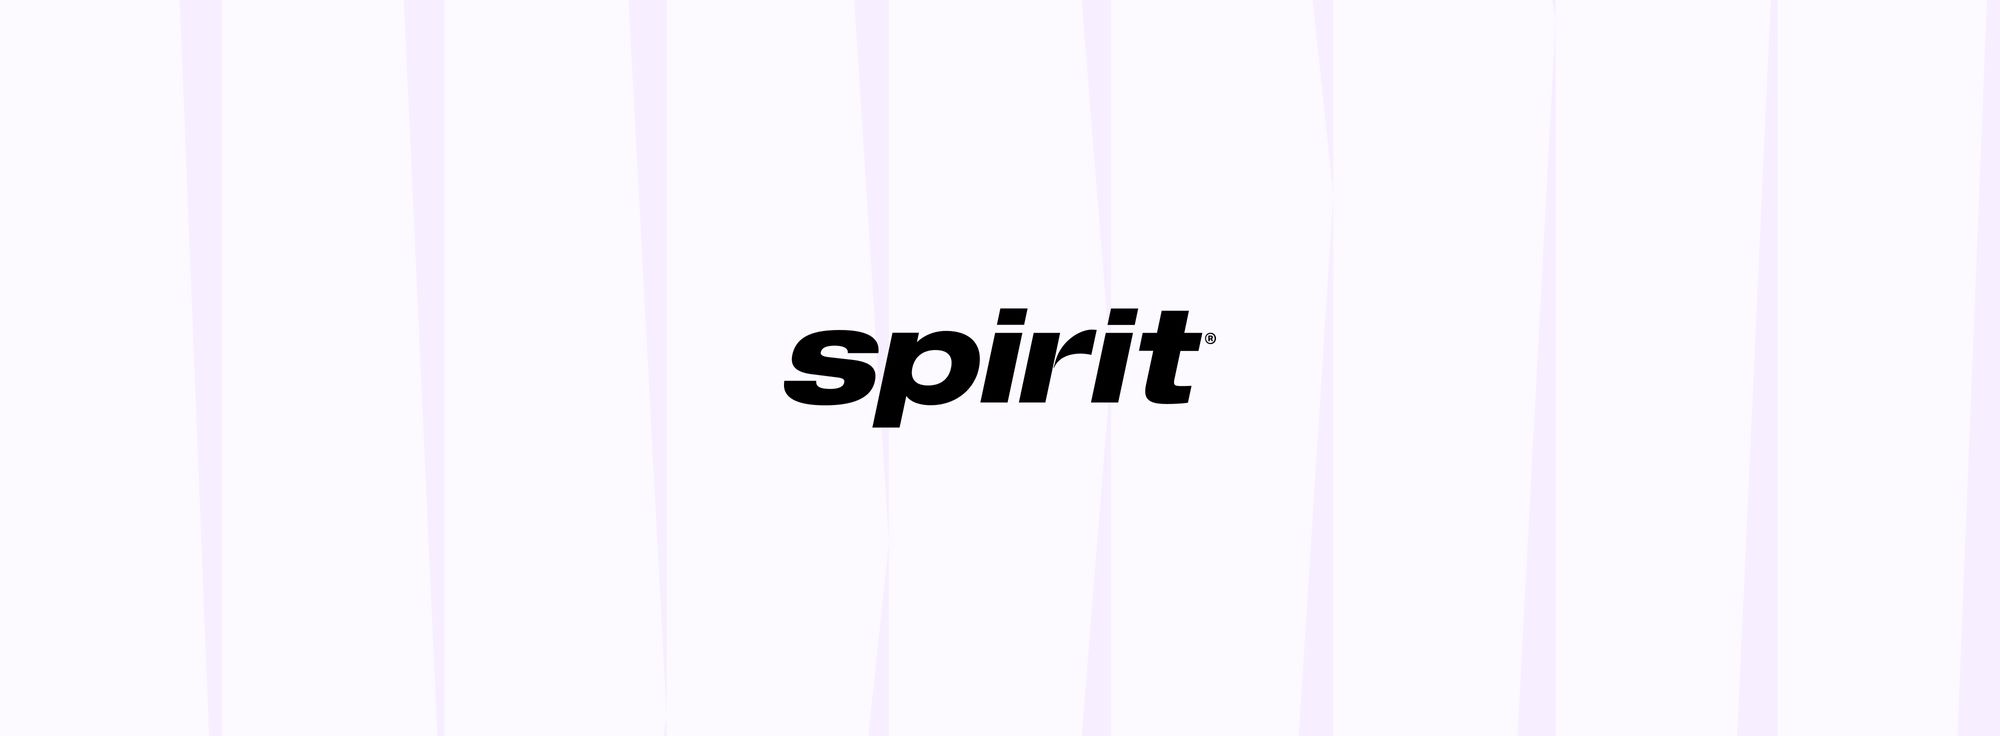 Duffel enters NDC partnership with Spirit Airlines to deliver affordable fares across the Americas for travel sellers